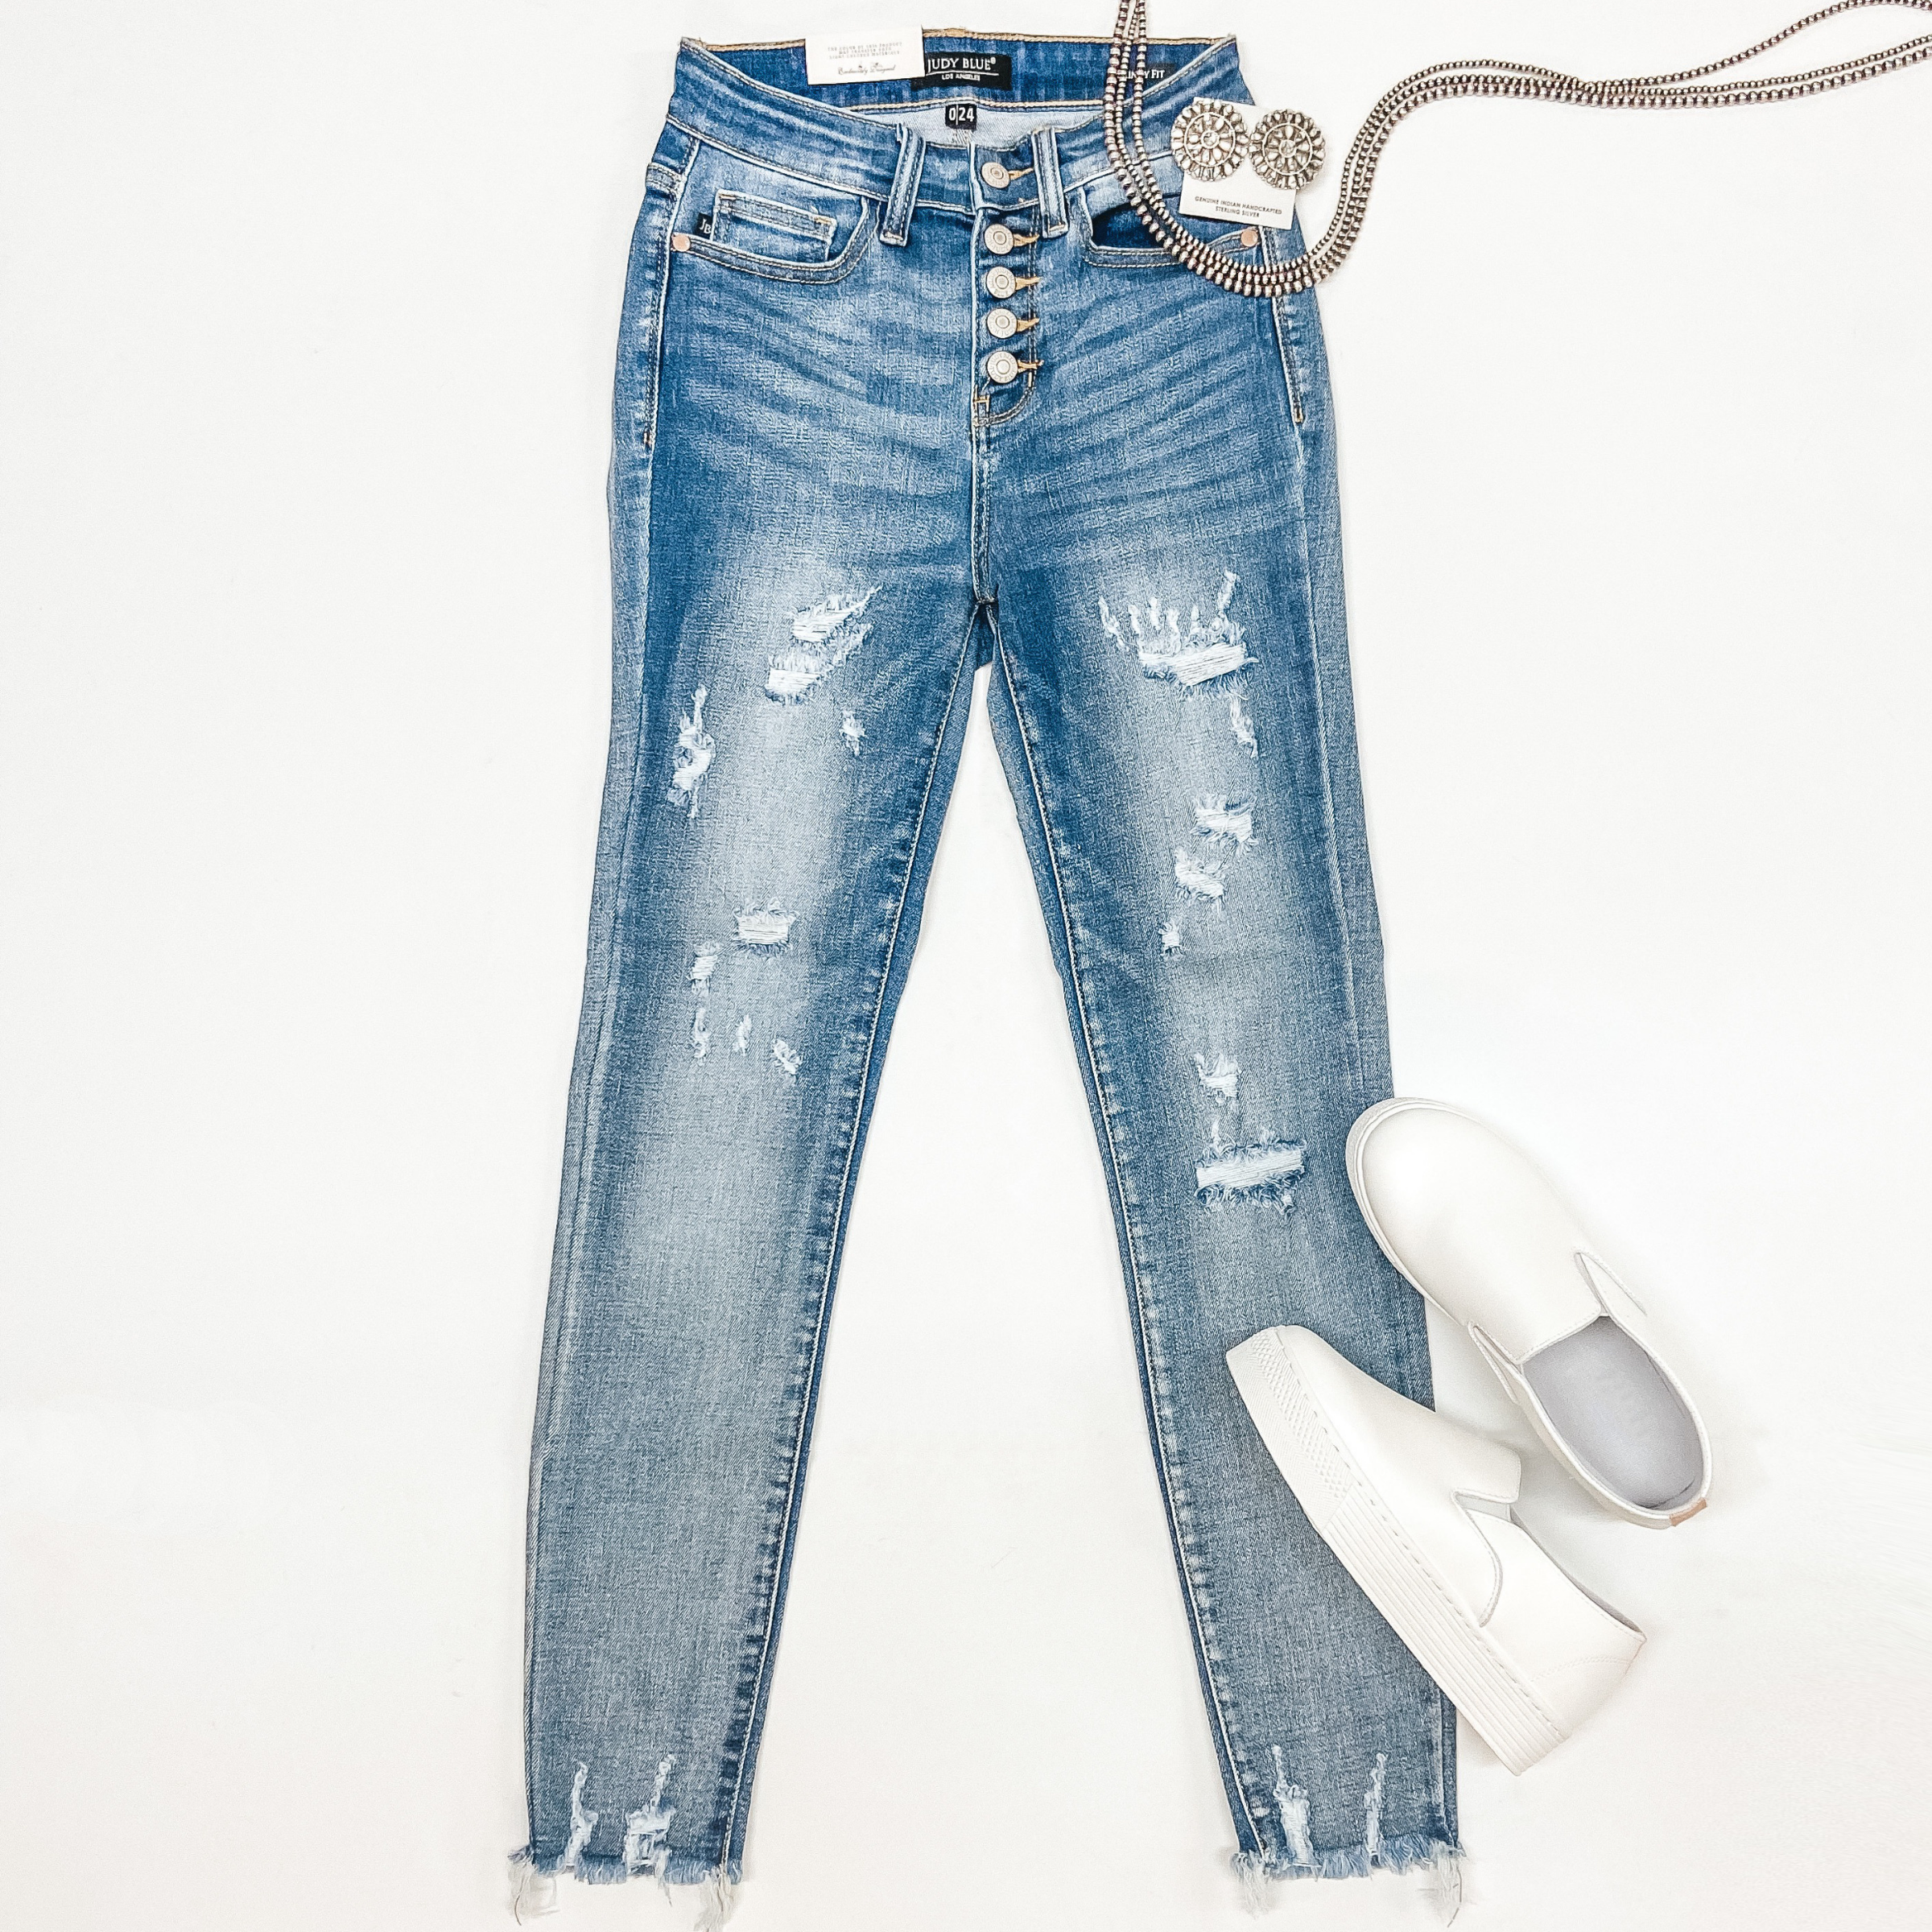 A pair of button fly distressed jeans with a raw hem. These jeans are pictured on a white background with sterling silver jewelry and white sneakers.